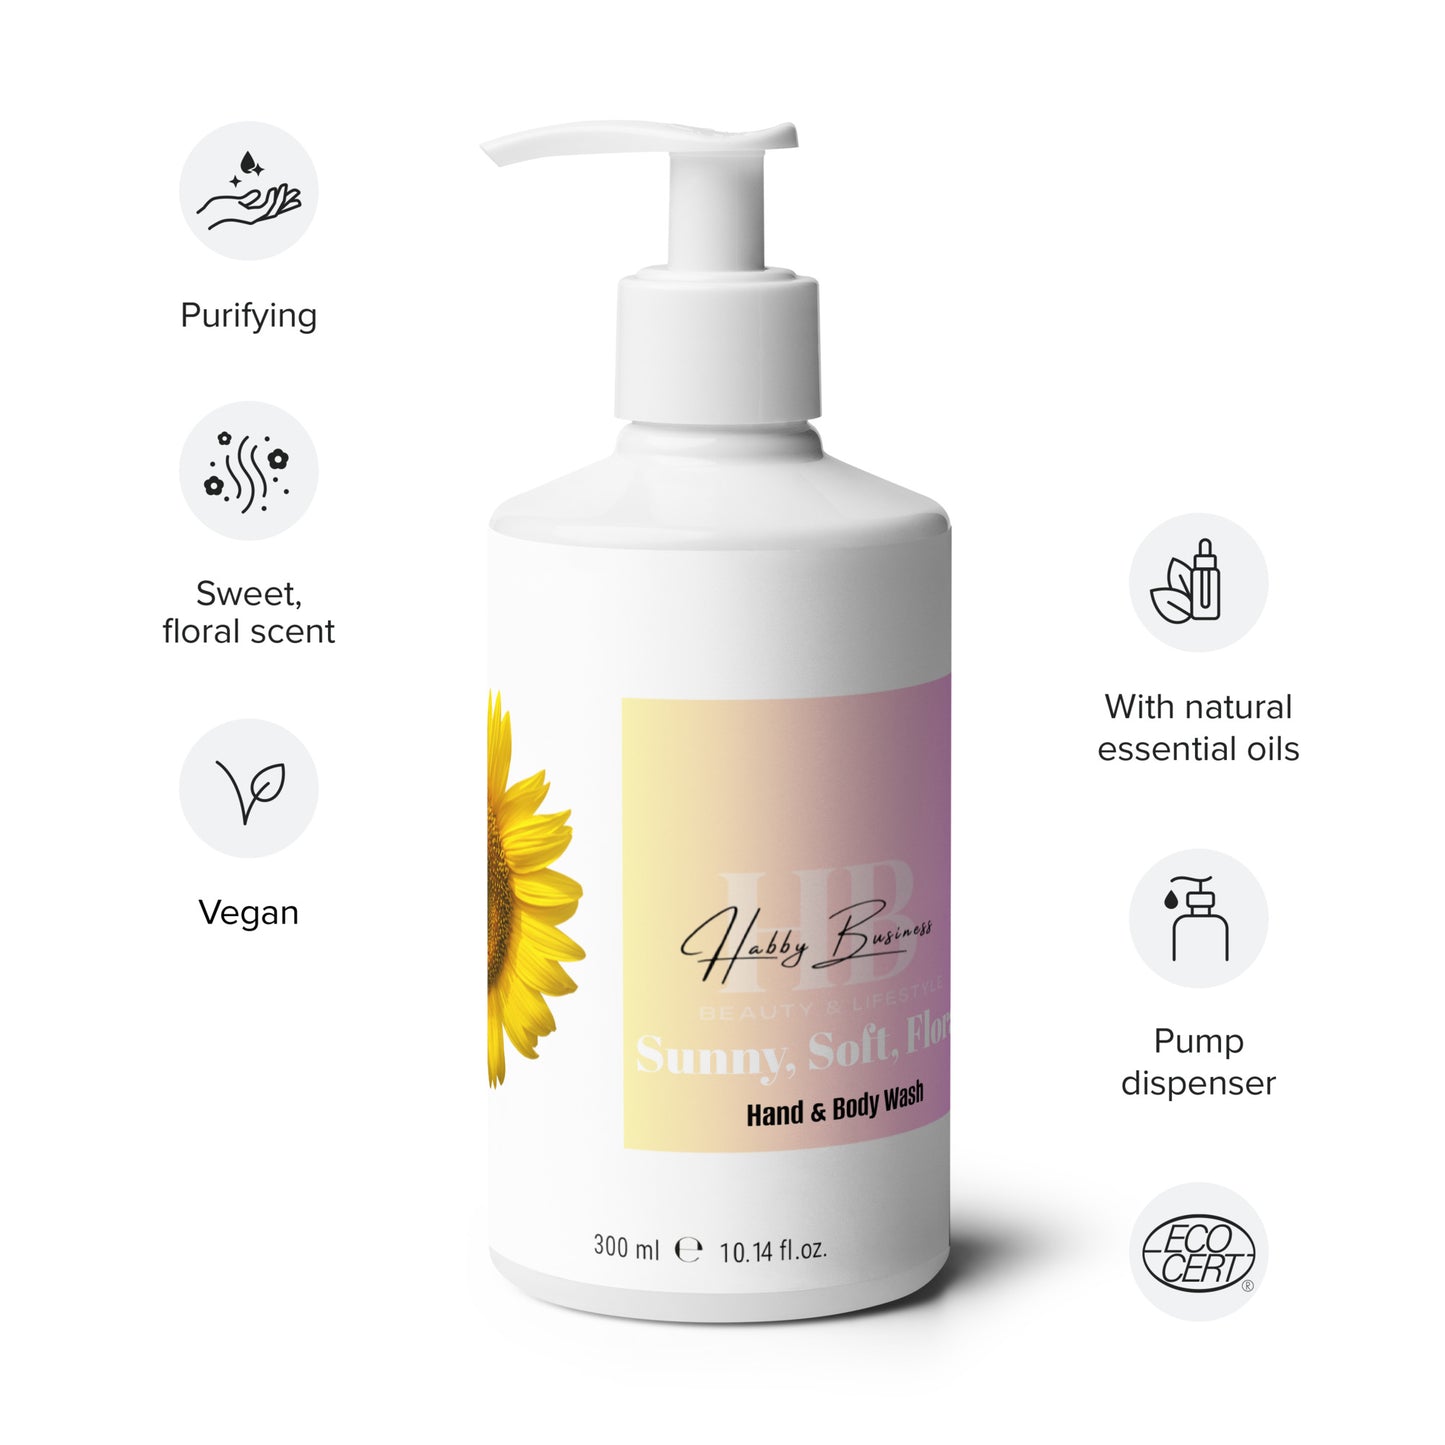 Soft Sunny Floral Hand & Body Wash